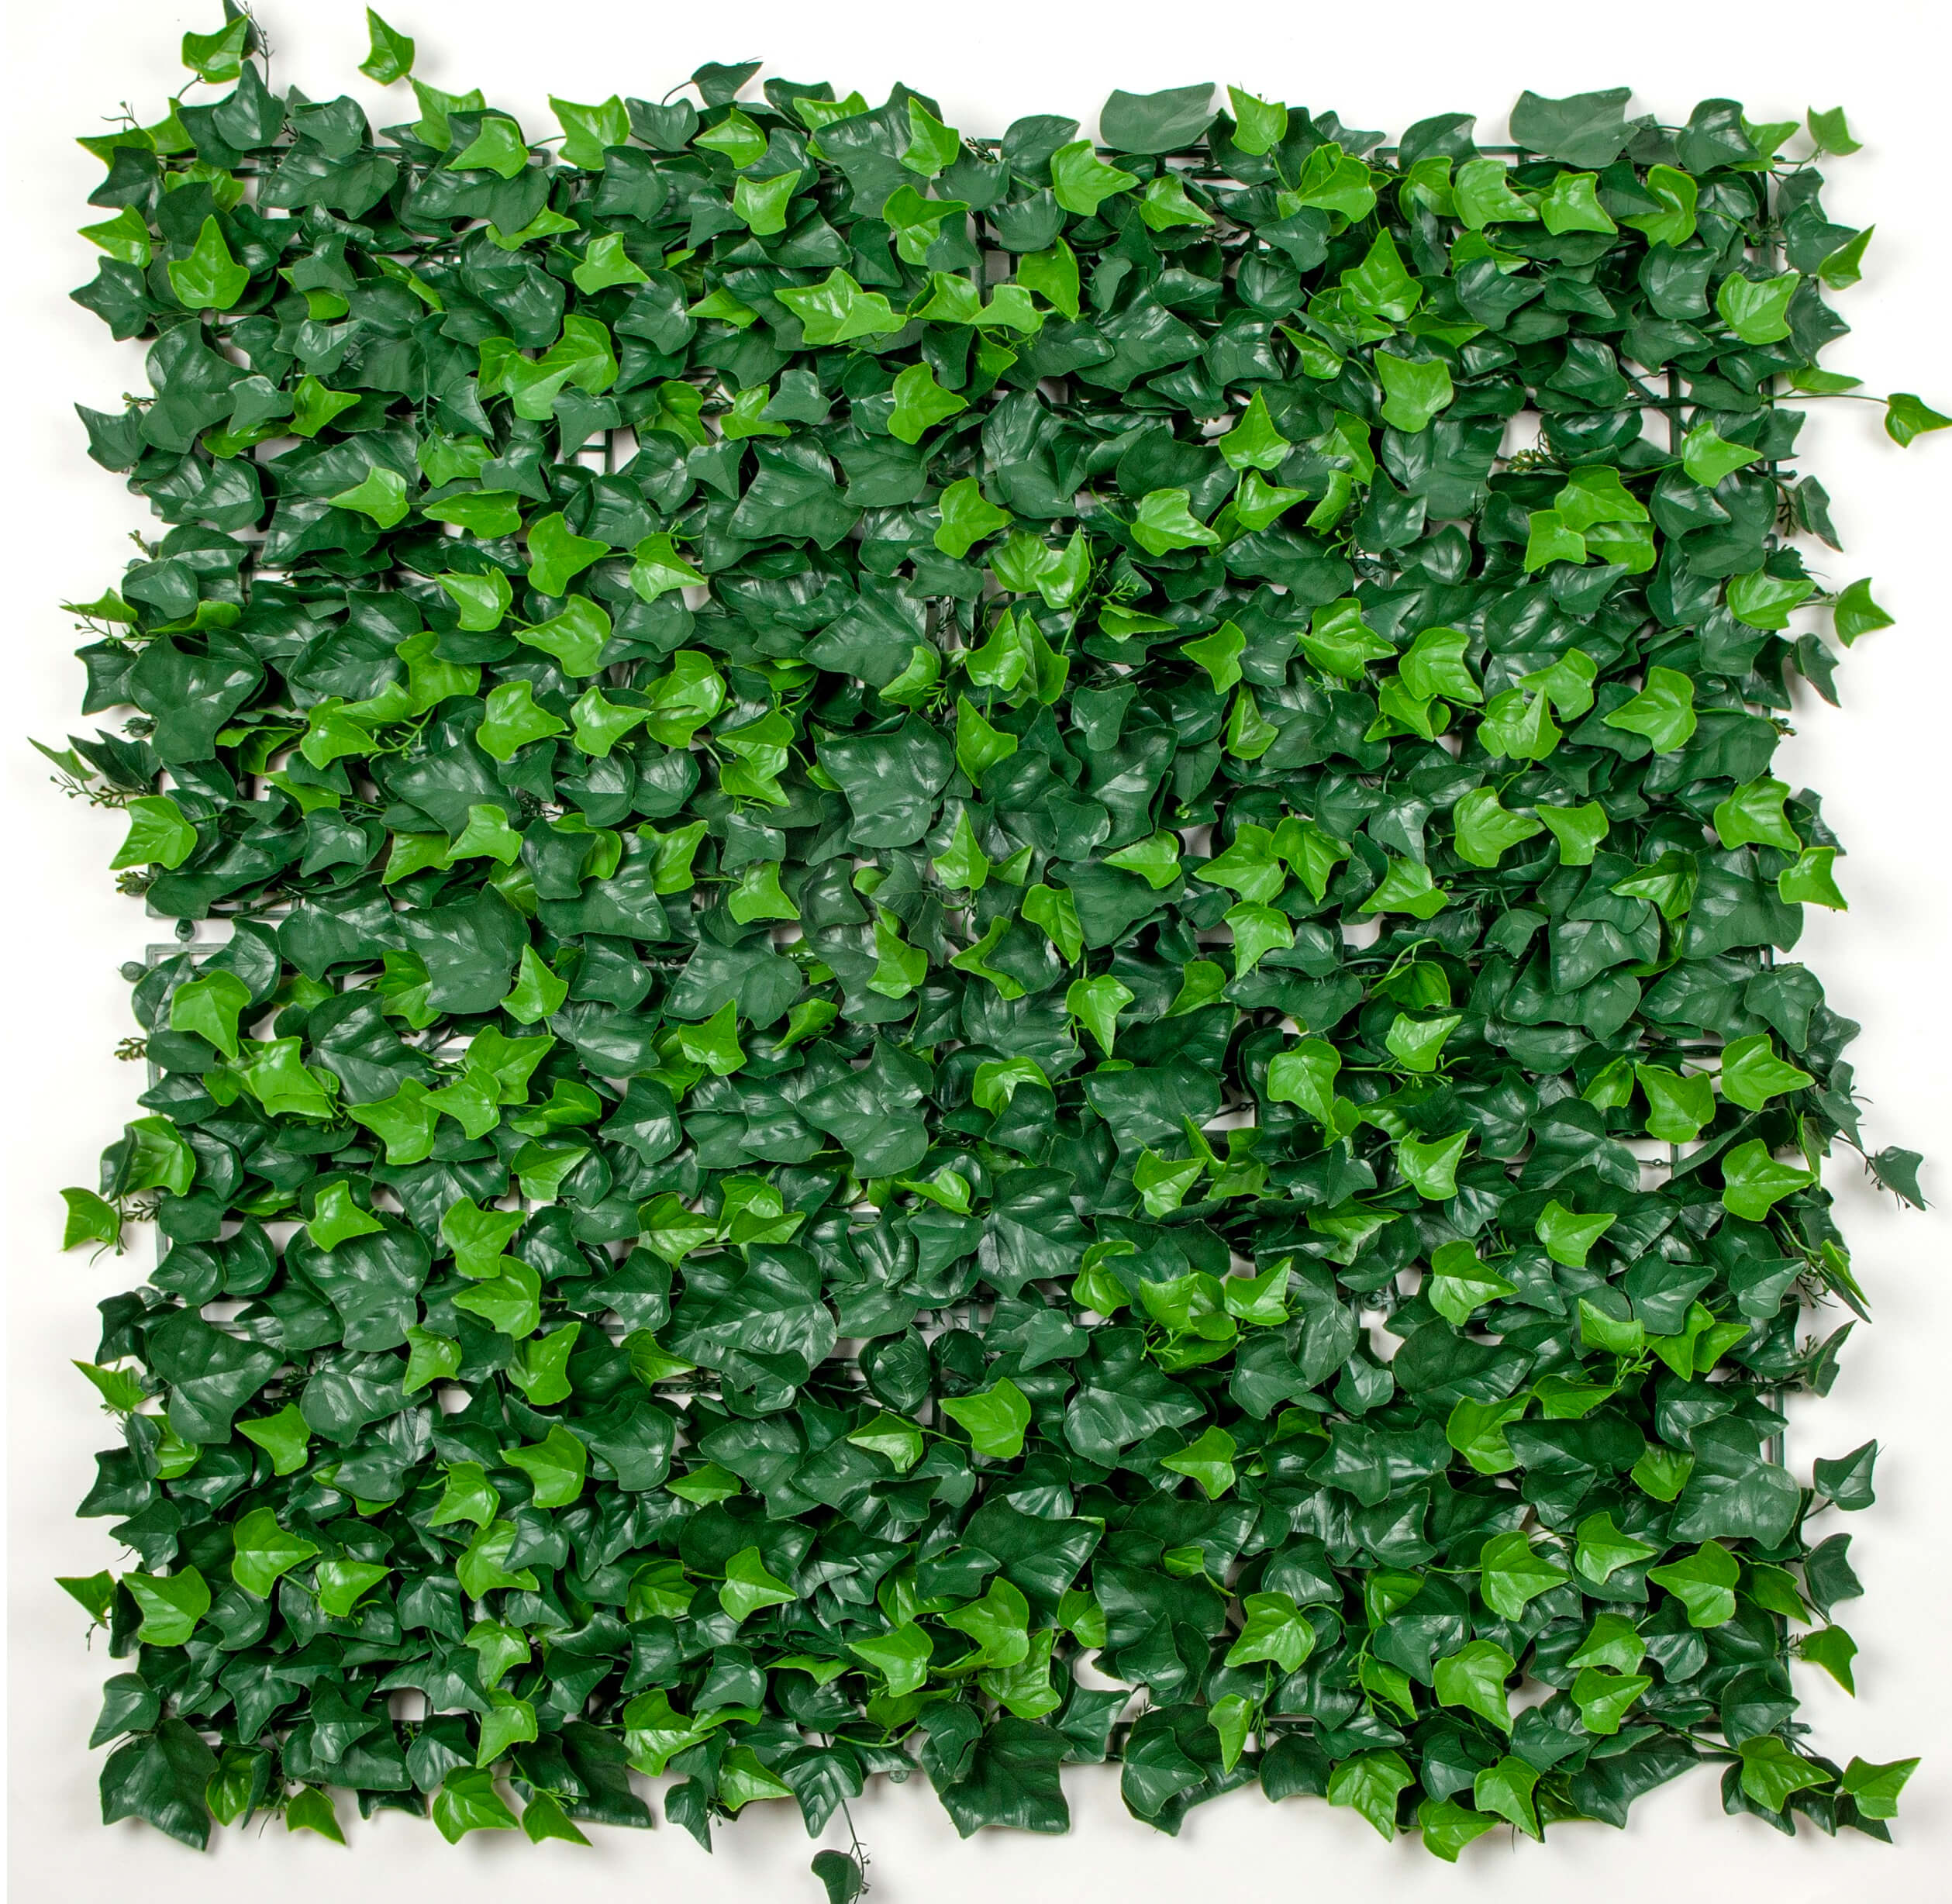 Artificial Boston Ivy Green Wall 33SQ FT Commercial Grade UV Resistant